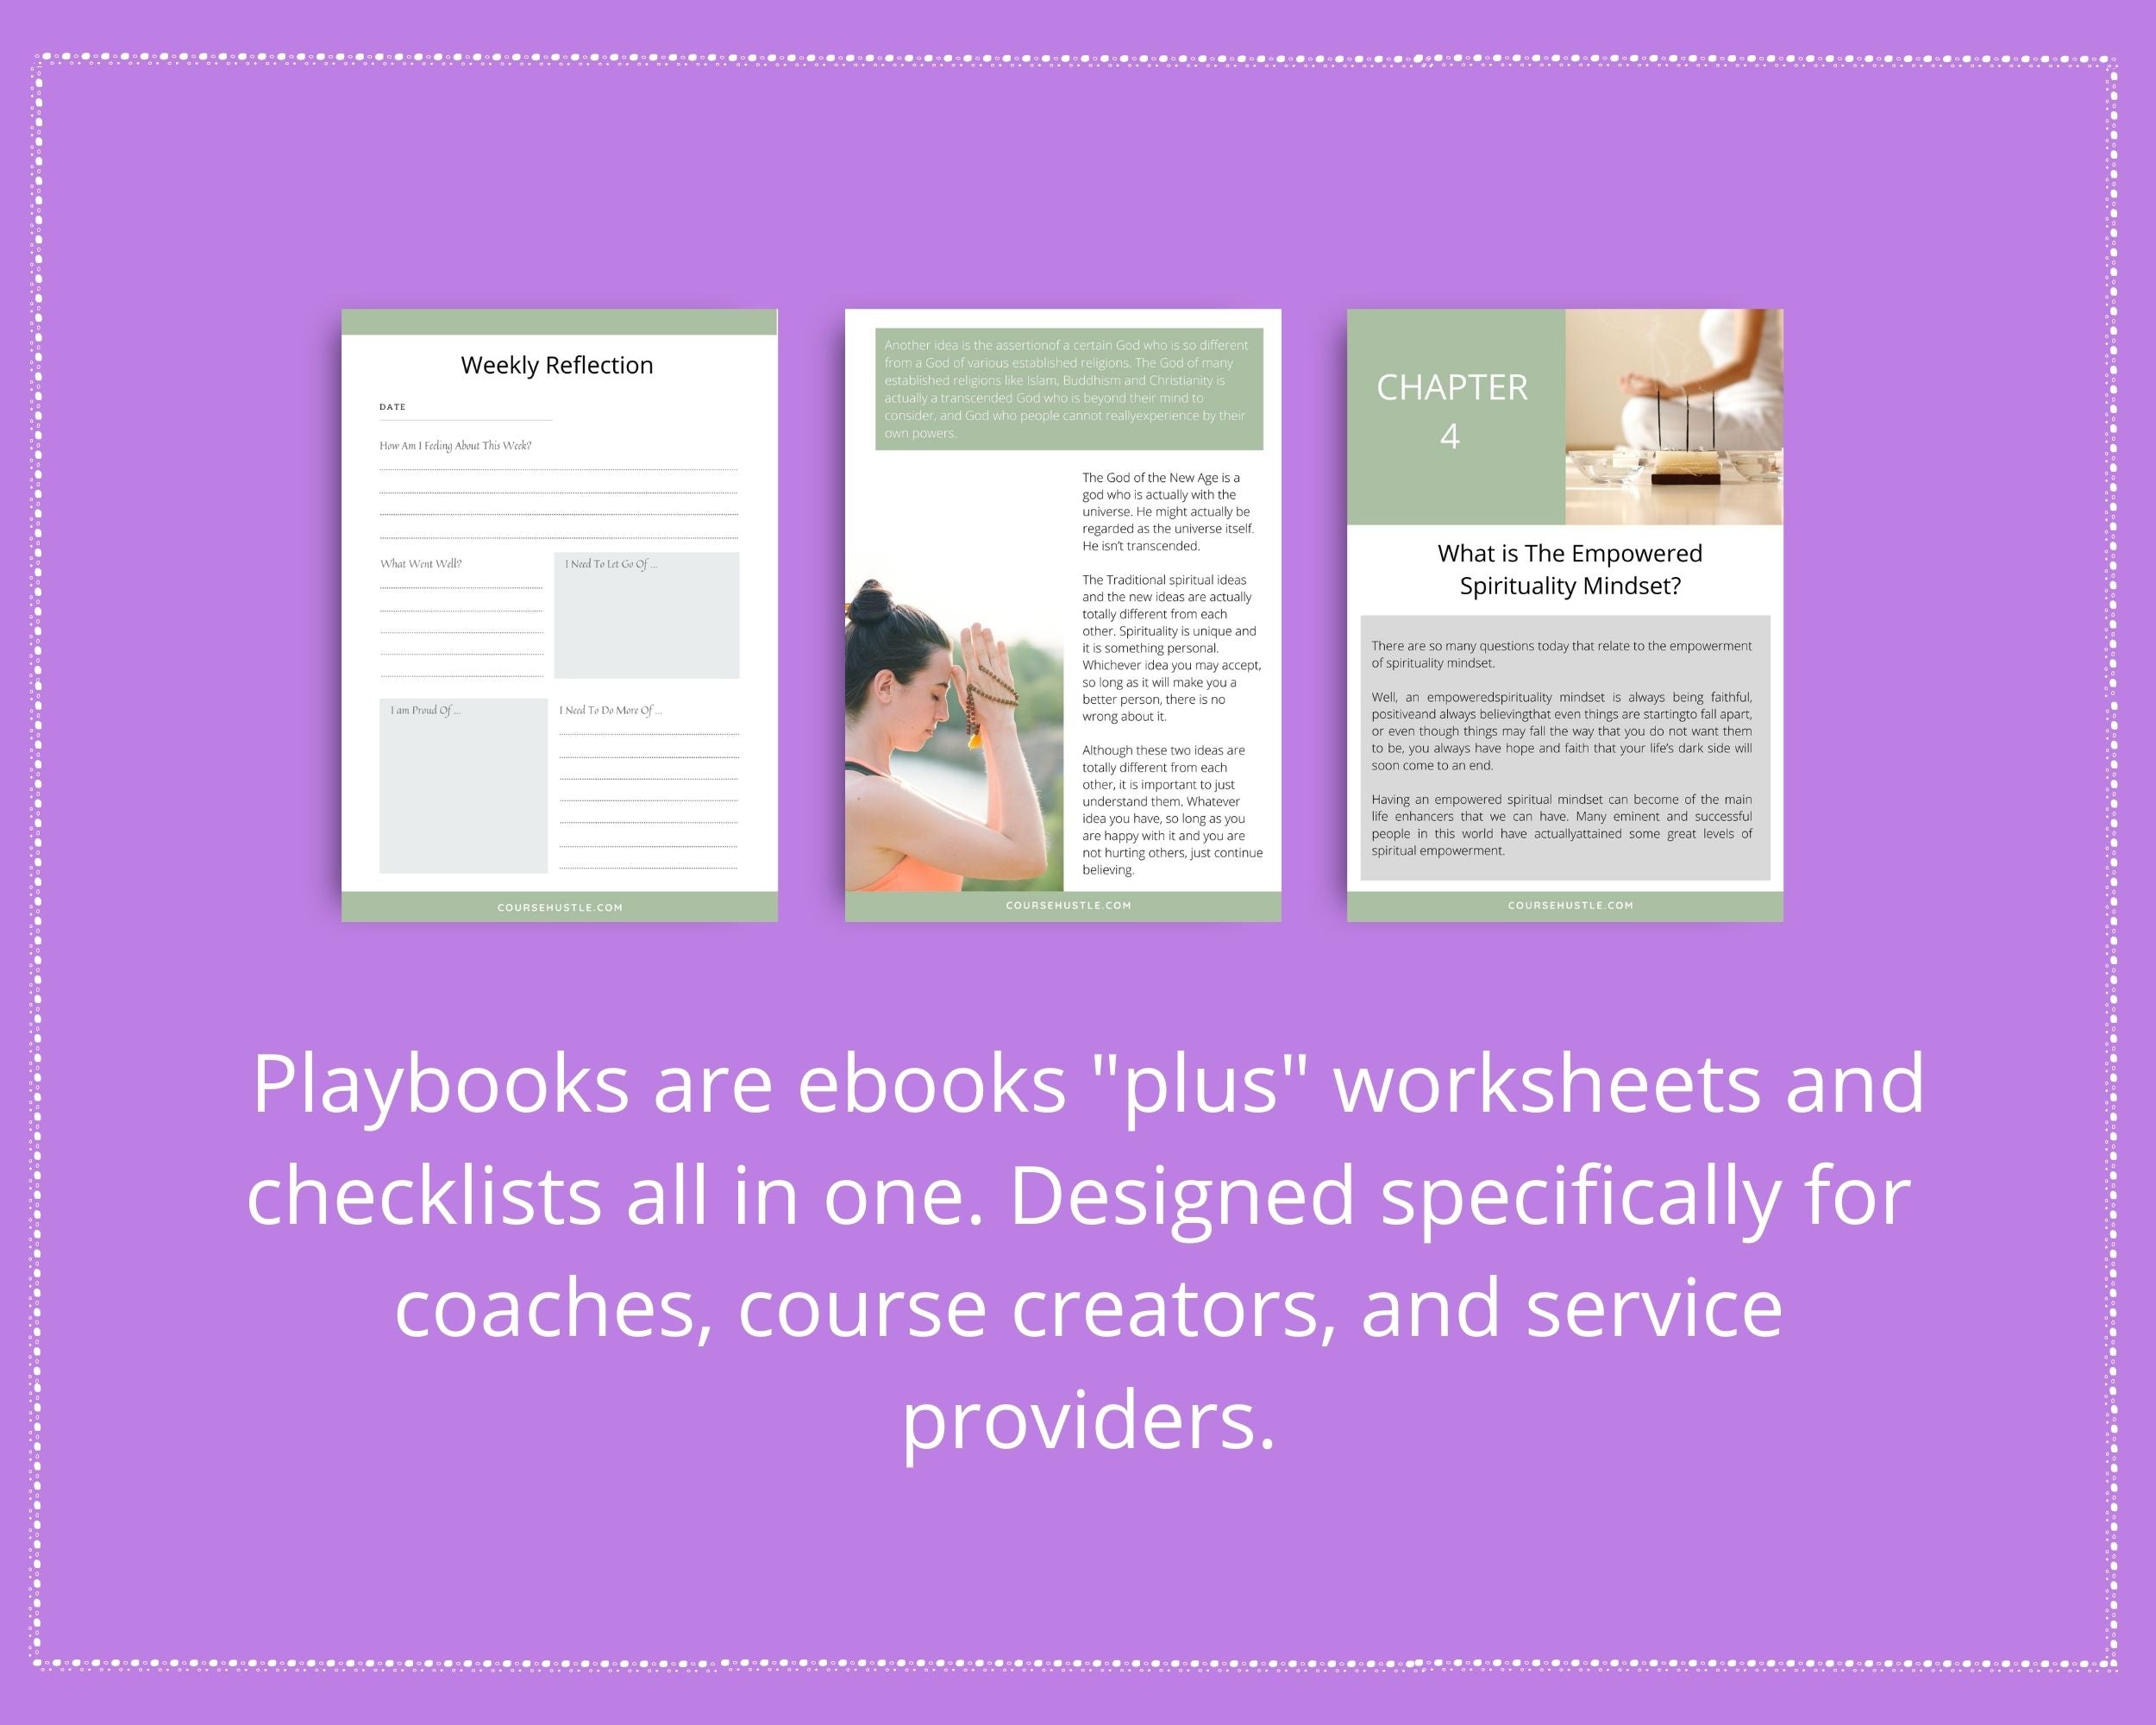 Done for You Spirituality Playbook in Canva | Editable A4 Size Canva Template